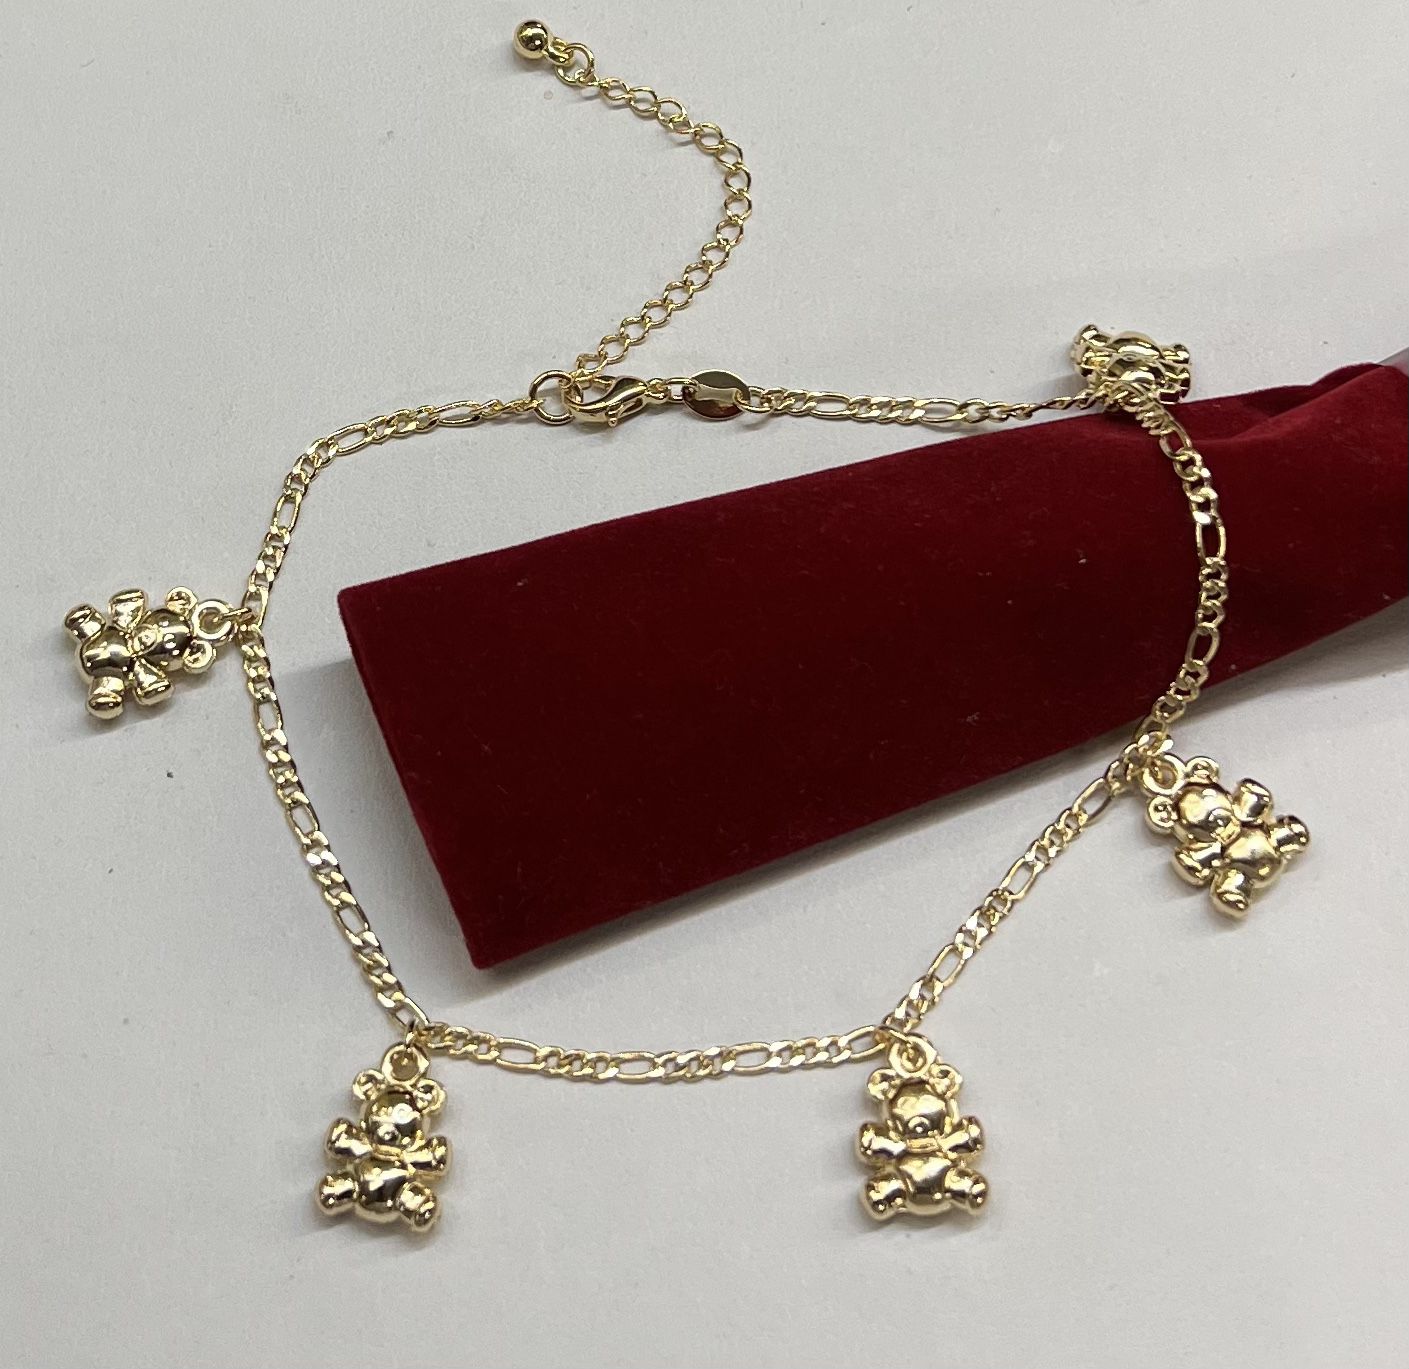 Anklet💥14k Gold Filled Teddy Bear Women Anklet Available In  - Can be worn in the shower -